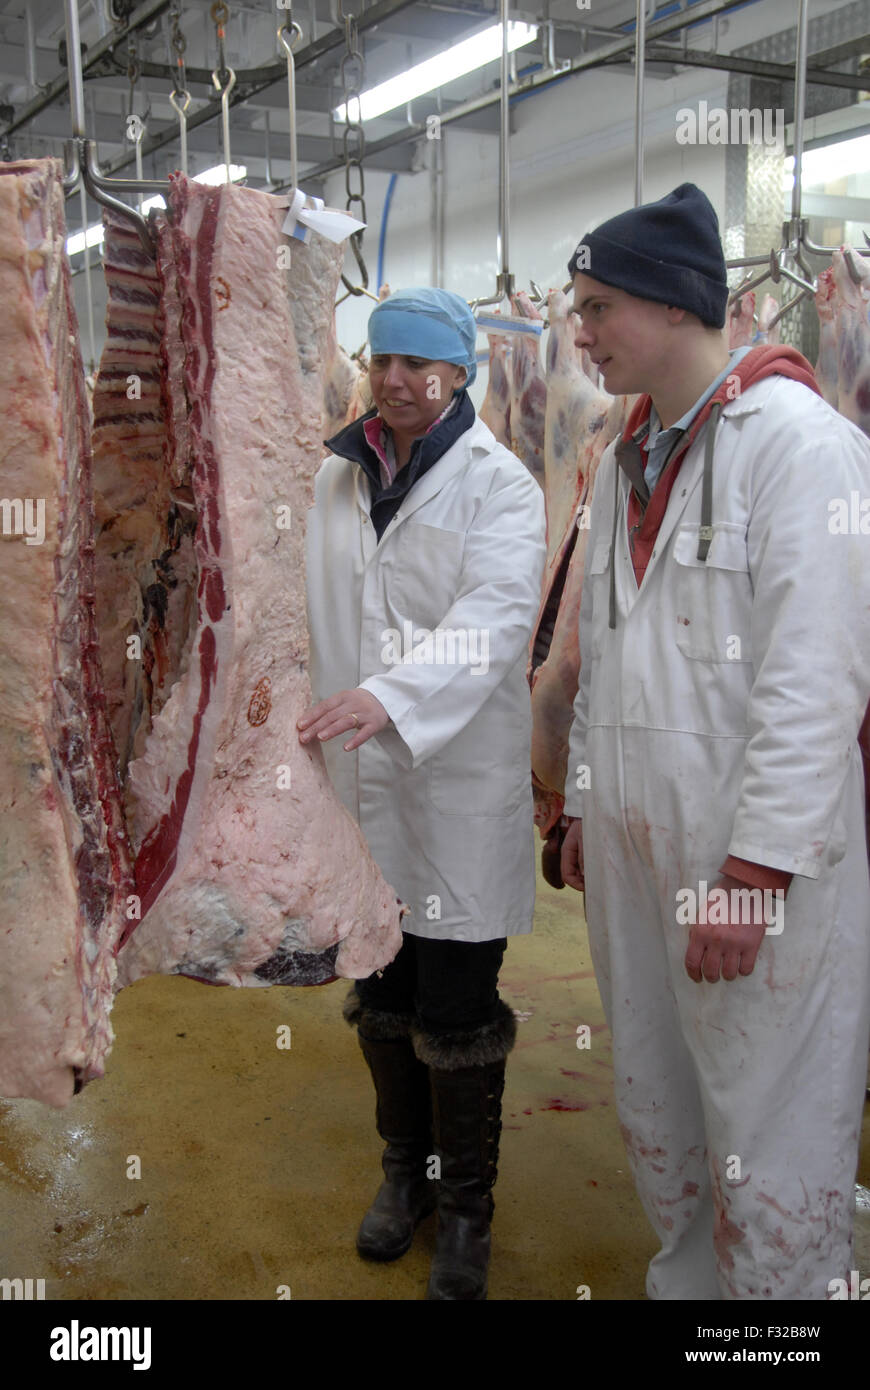 Workers sorting out lamb carcasses in small farm based abattoir, Heathfield, East Sussex, England, January Stock Photo